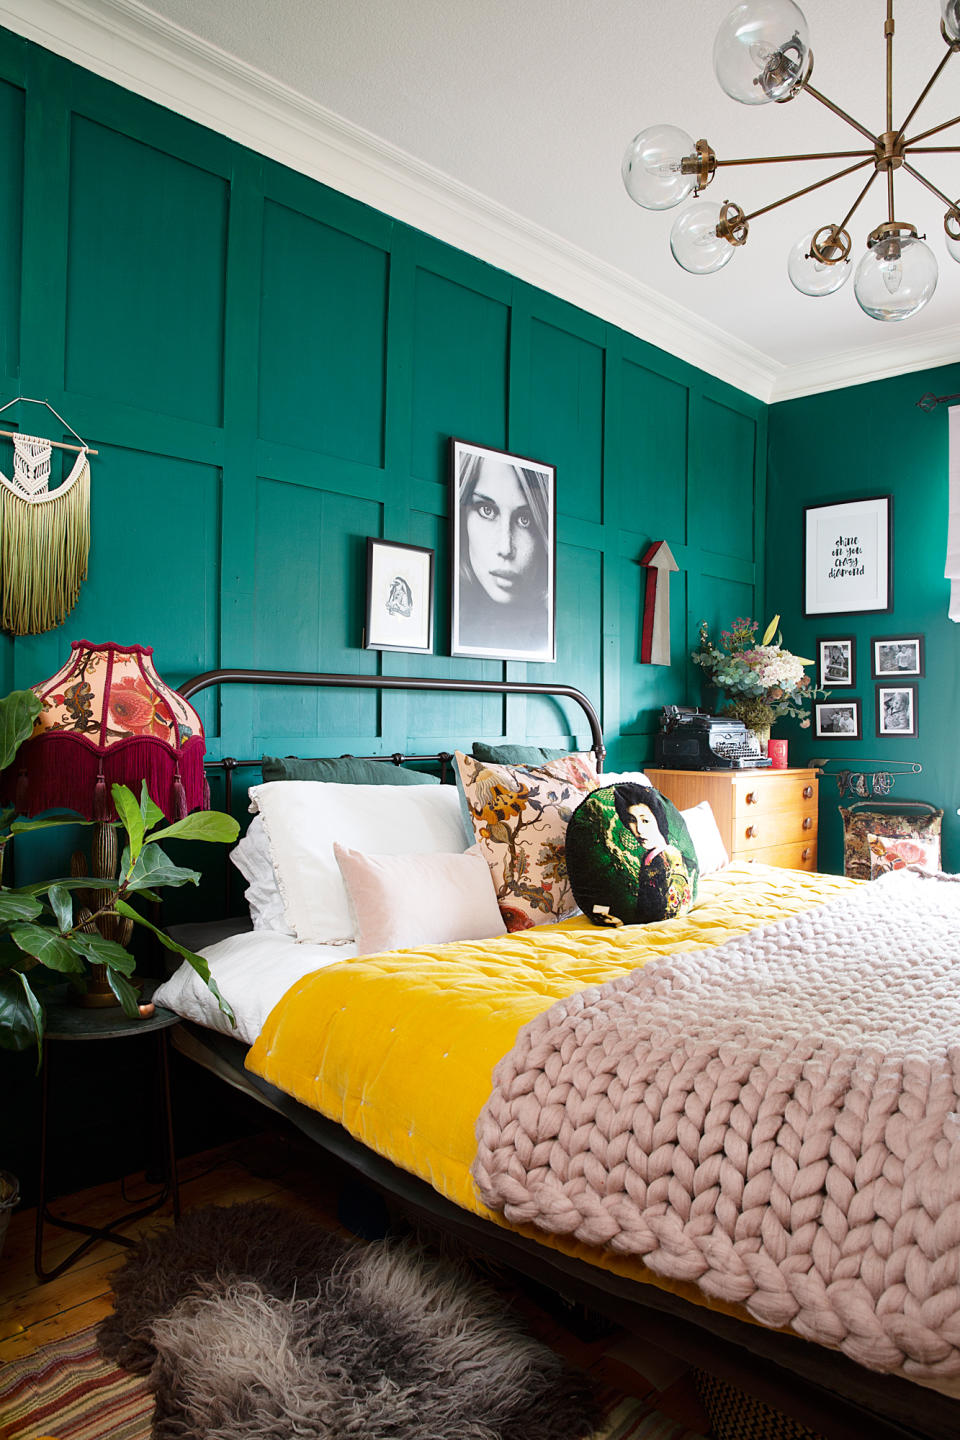 Choose contrasting colors for vibrant bedroom ideas